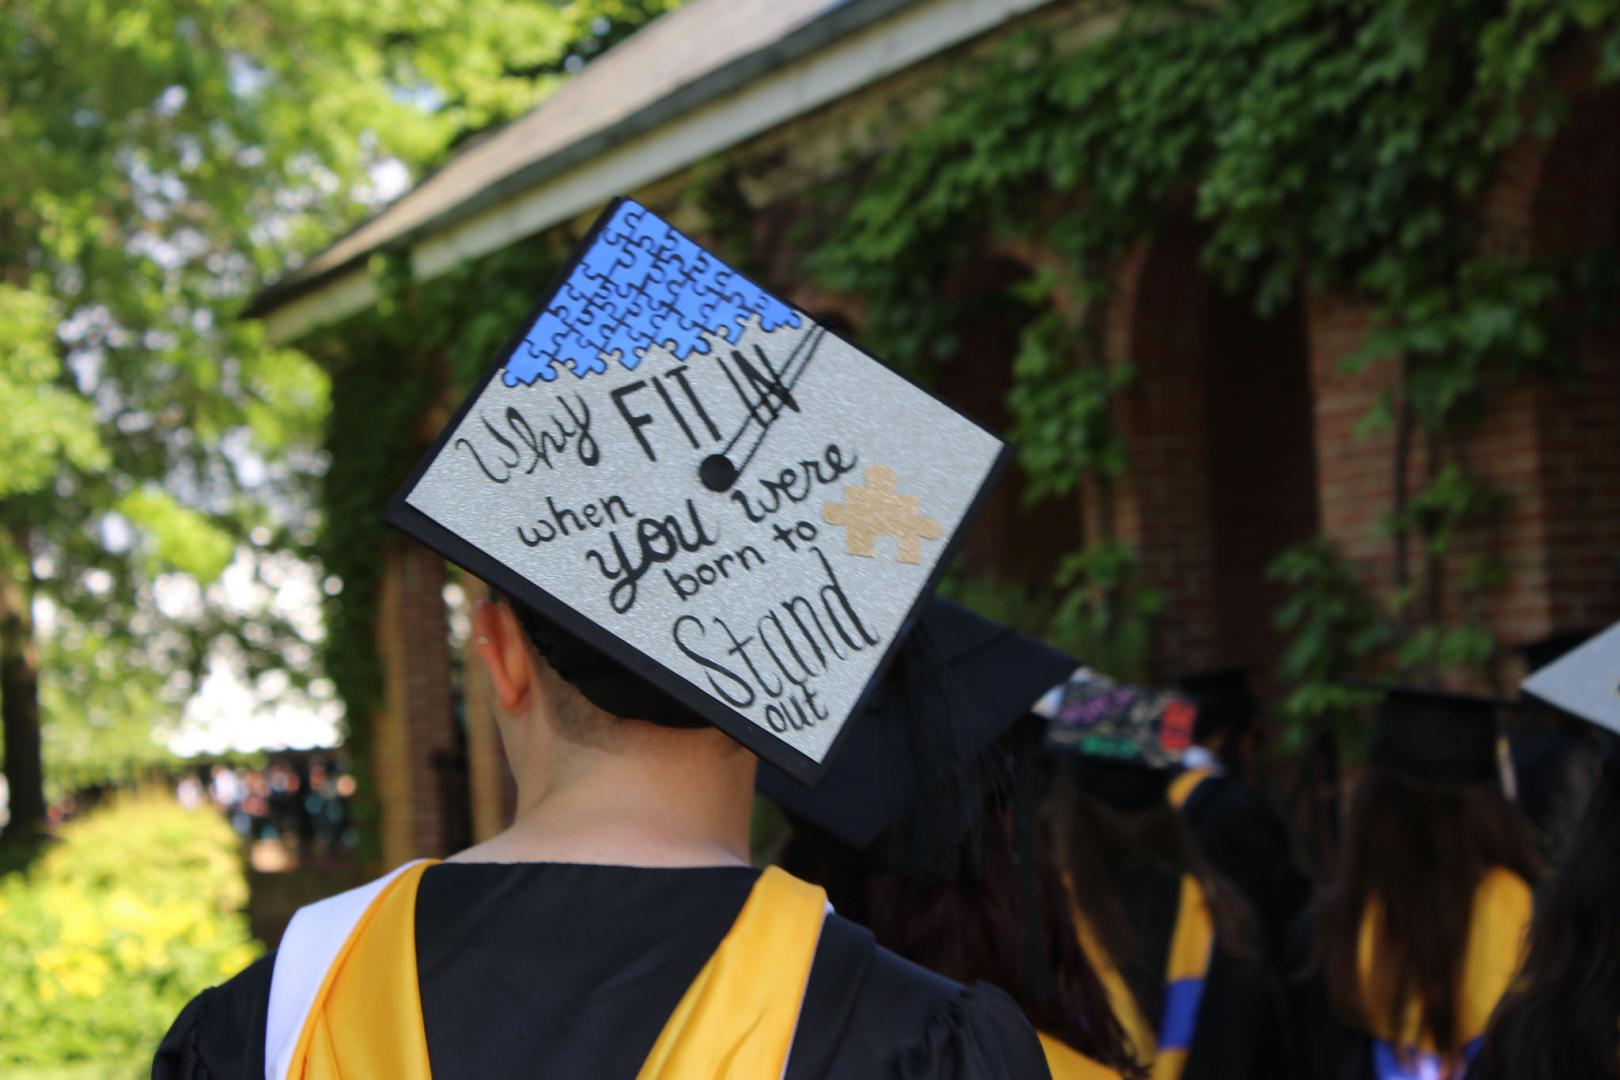 Commencement Cap: Why fit in when you can stand out